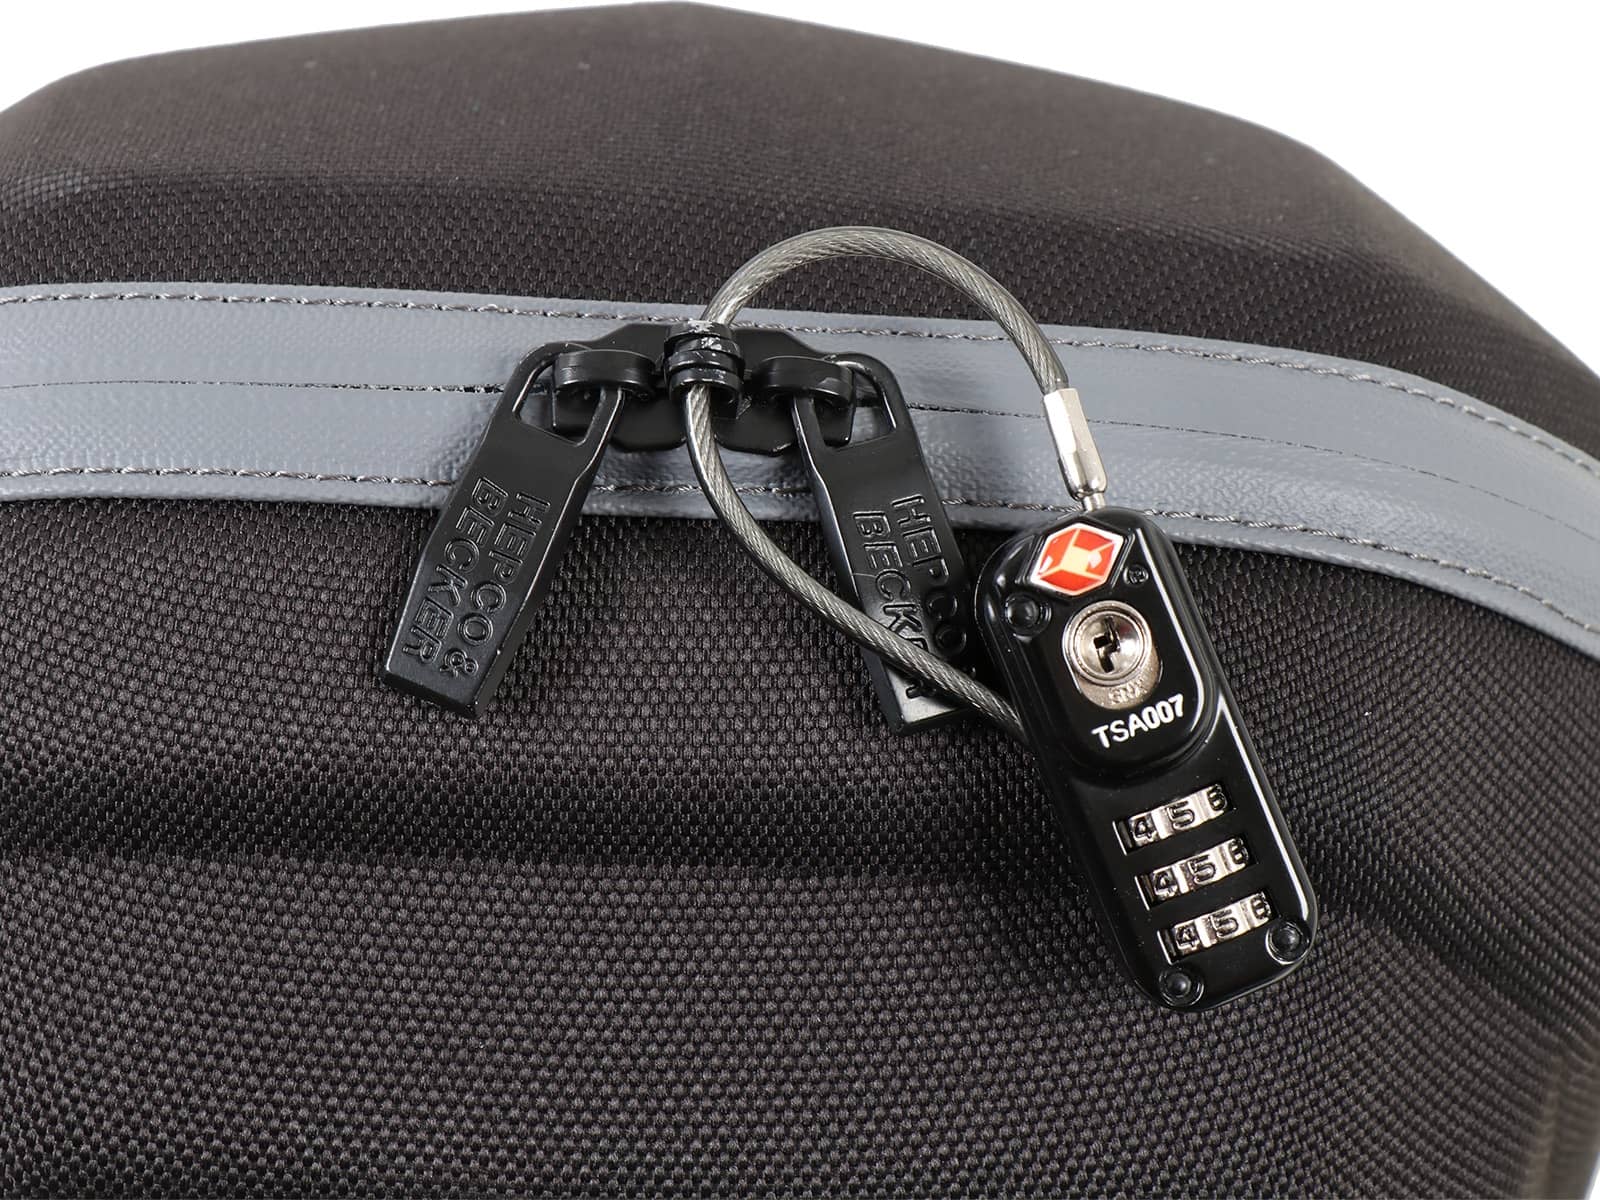 Anti-theft device for tank bags and rear bags Lock-it and Basic by Hepco&Becker